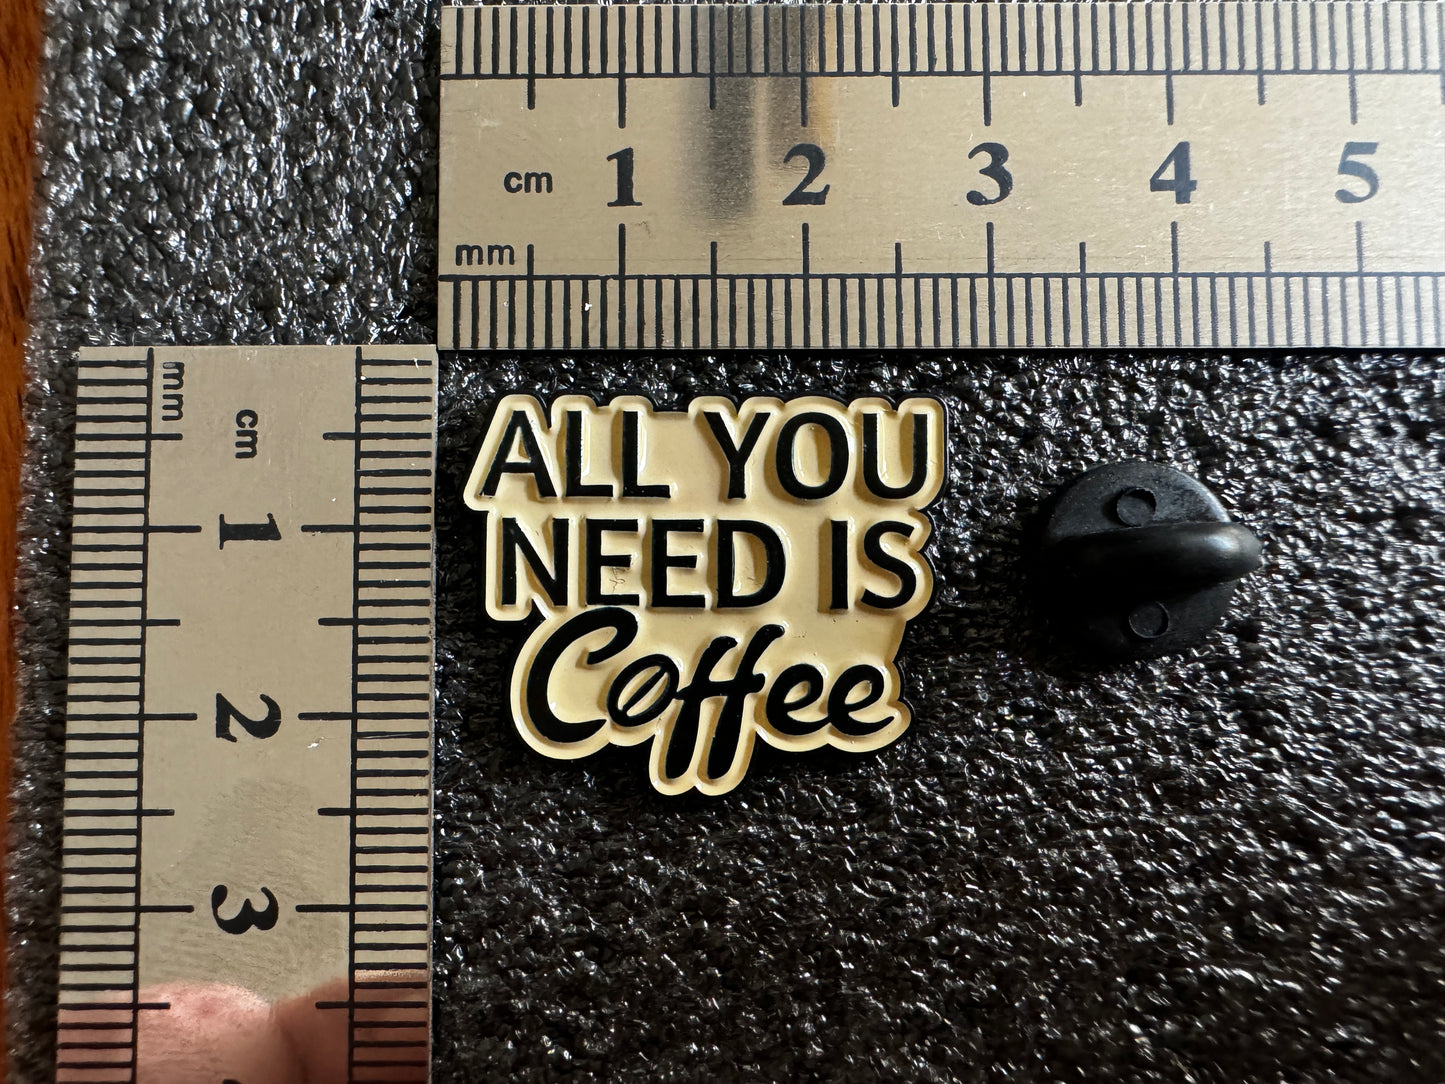 Metall-Pin "All you need is coffee"